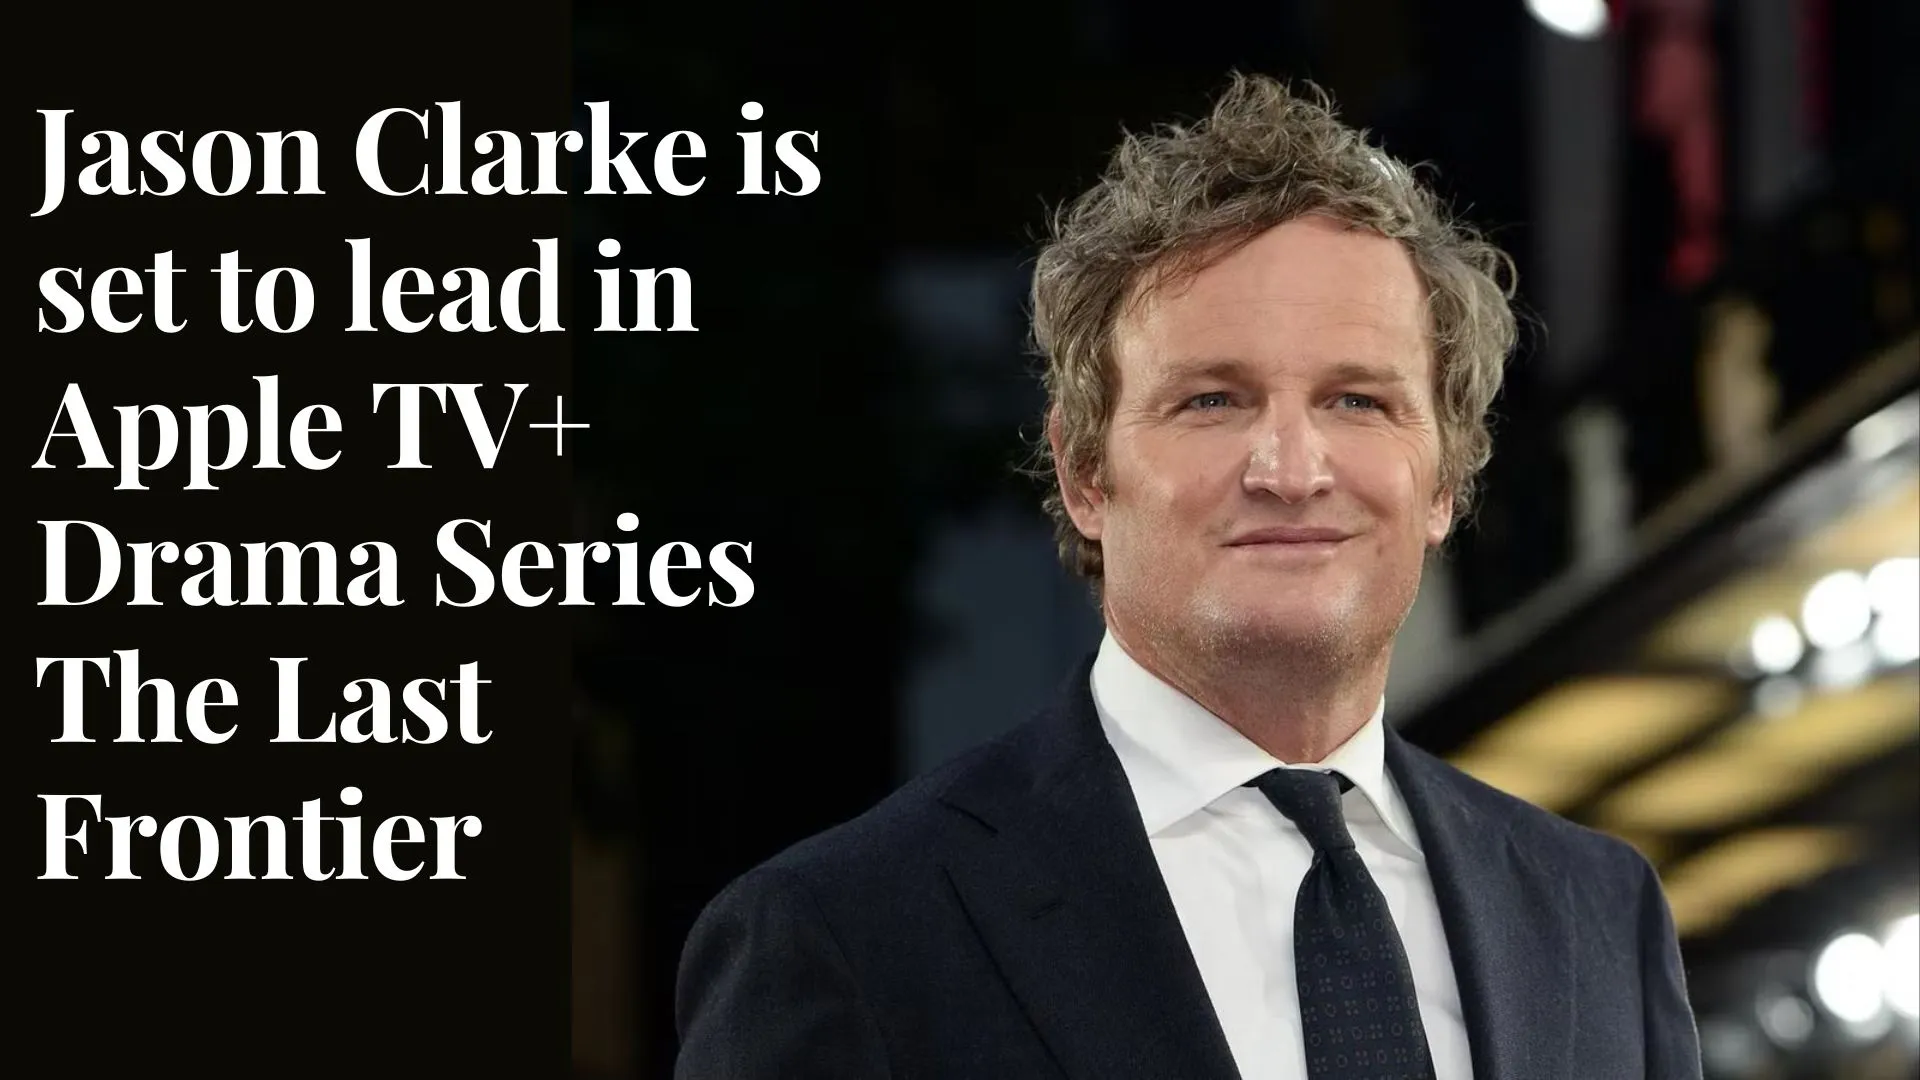 Jason Clarke is set to lead in Apple TV+ Drama Series The Last Frontier (Image credit: independent)